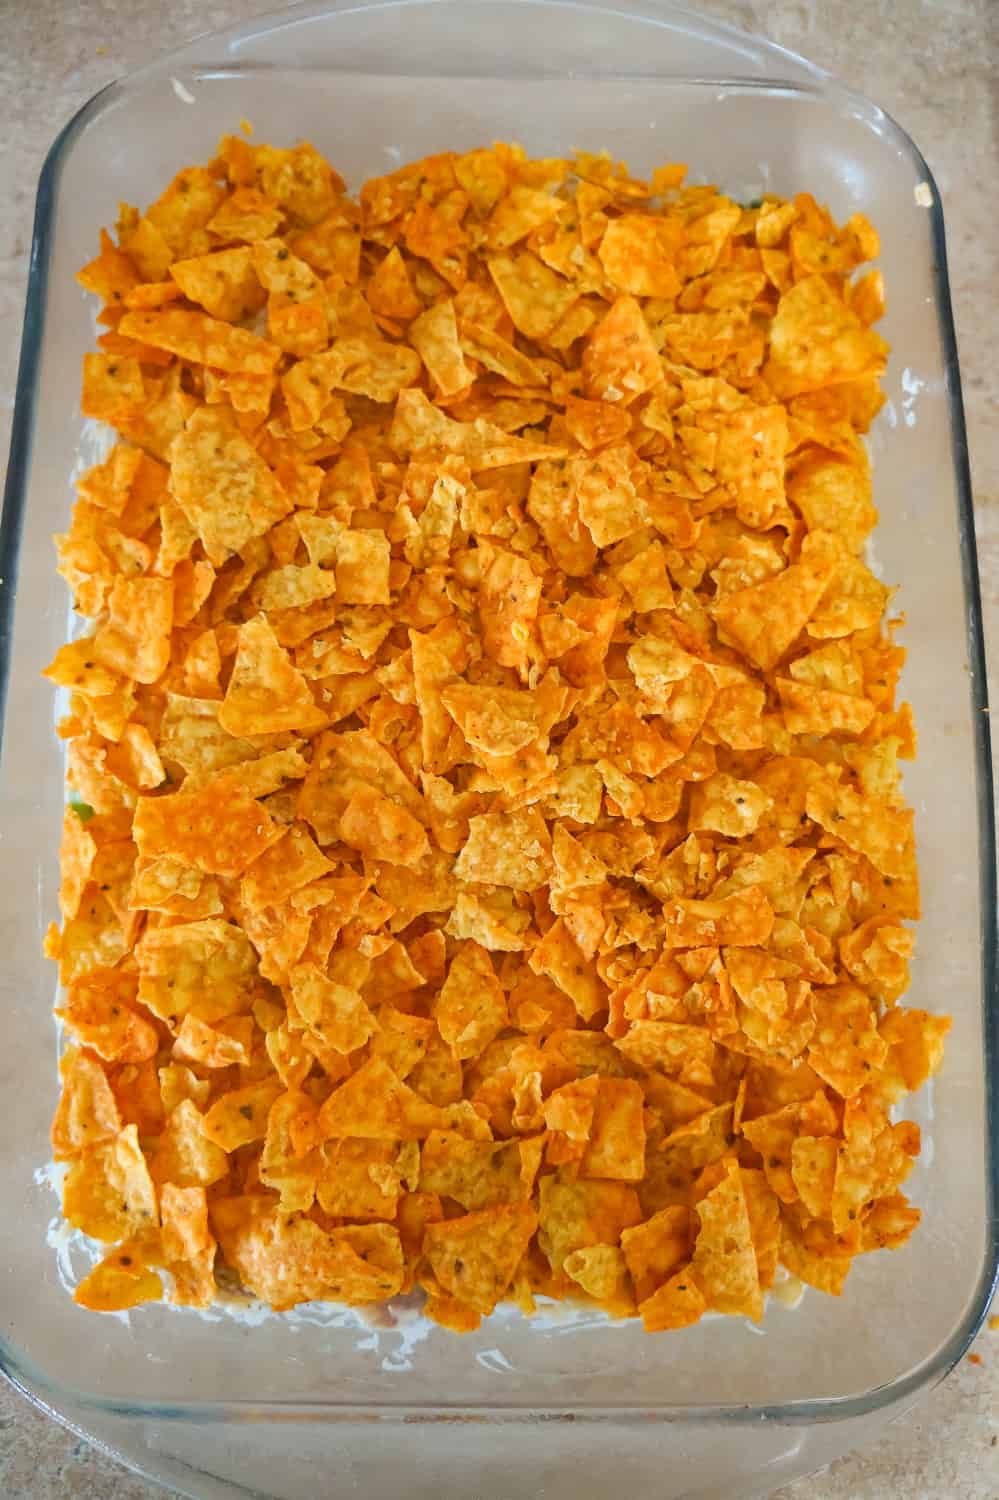 crumbled Doritos on top of casserole